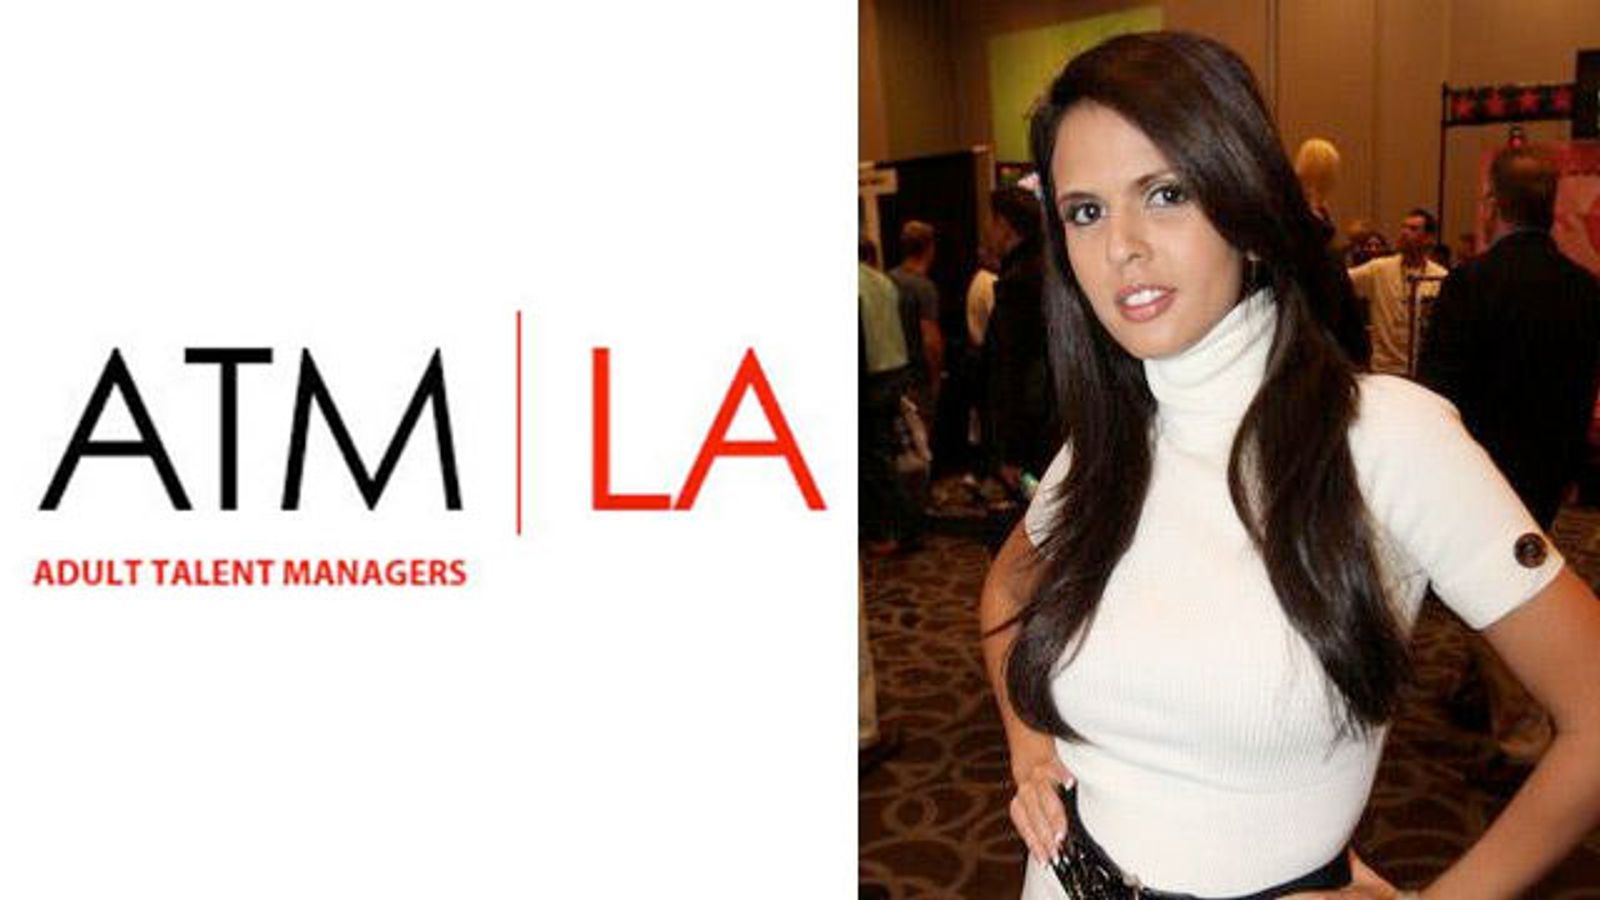 Shy Love Sells Remaining Interest in ATMLA to Mark "Blazing" Schechter